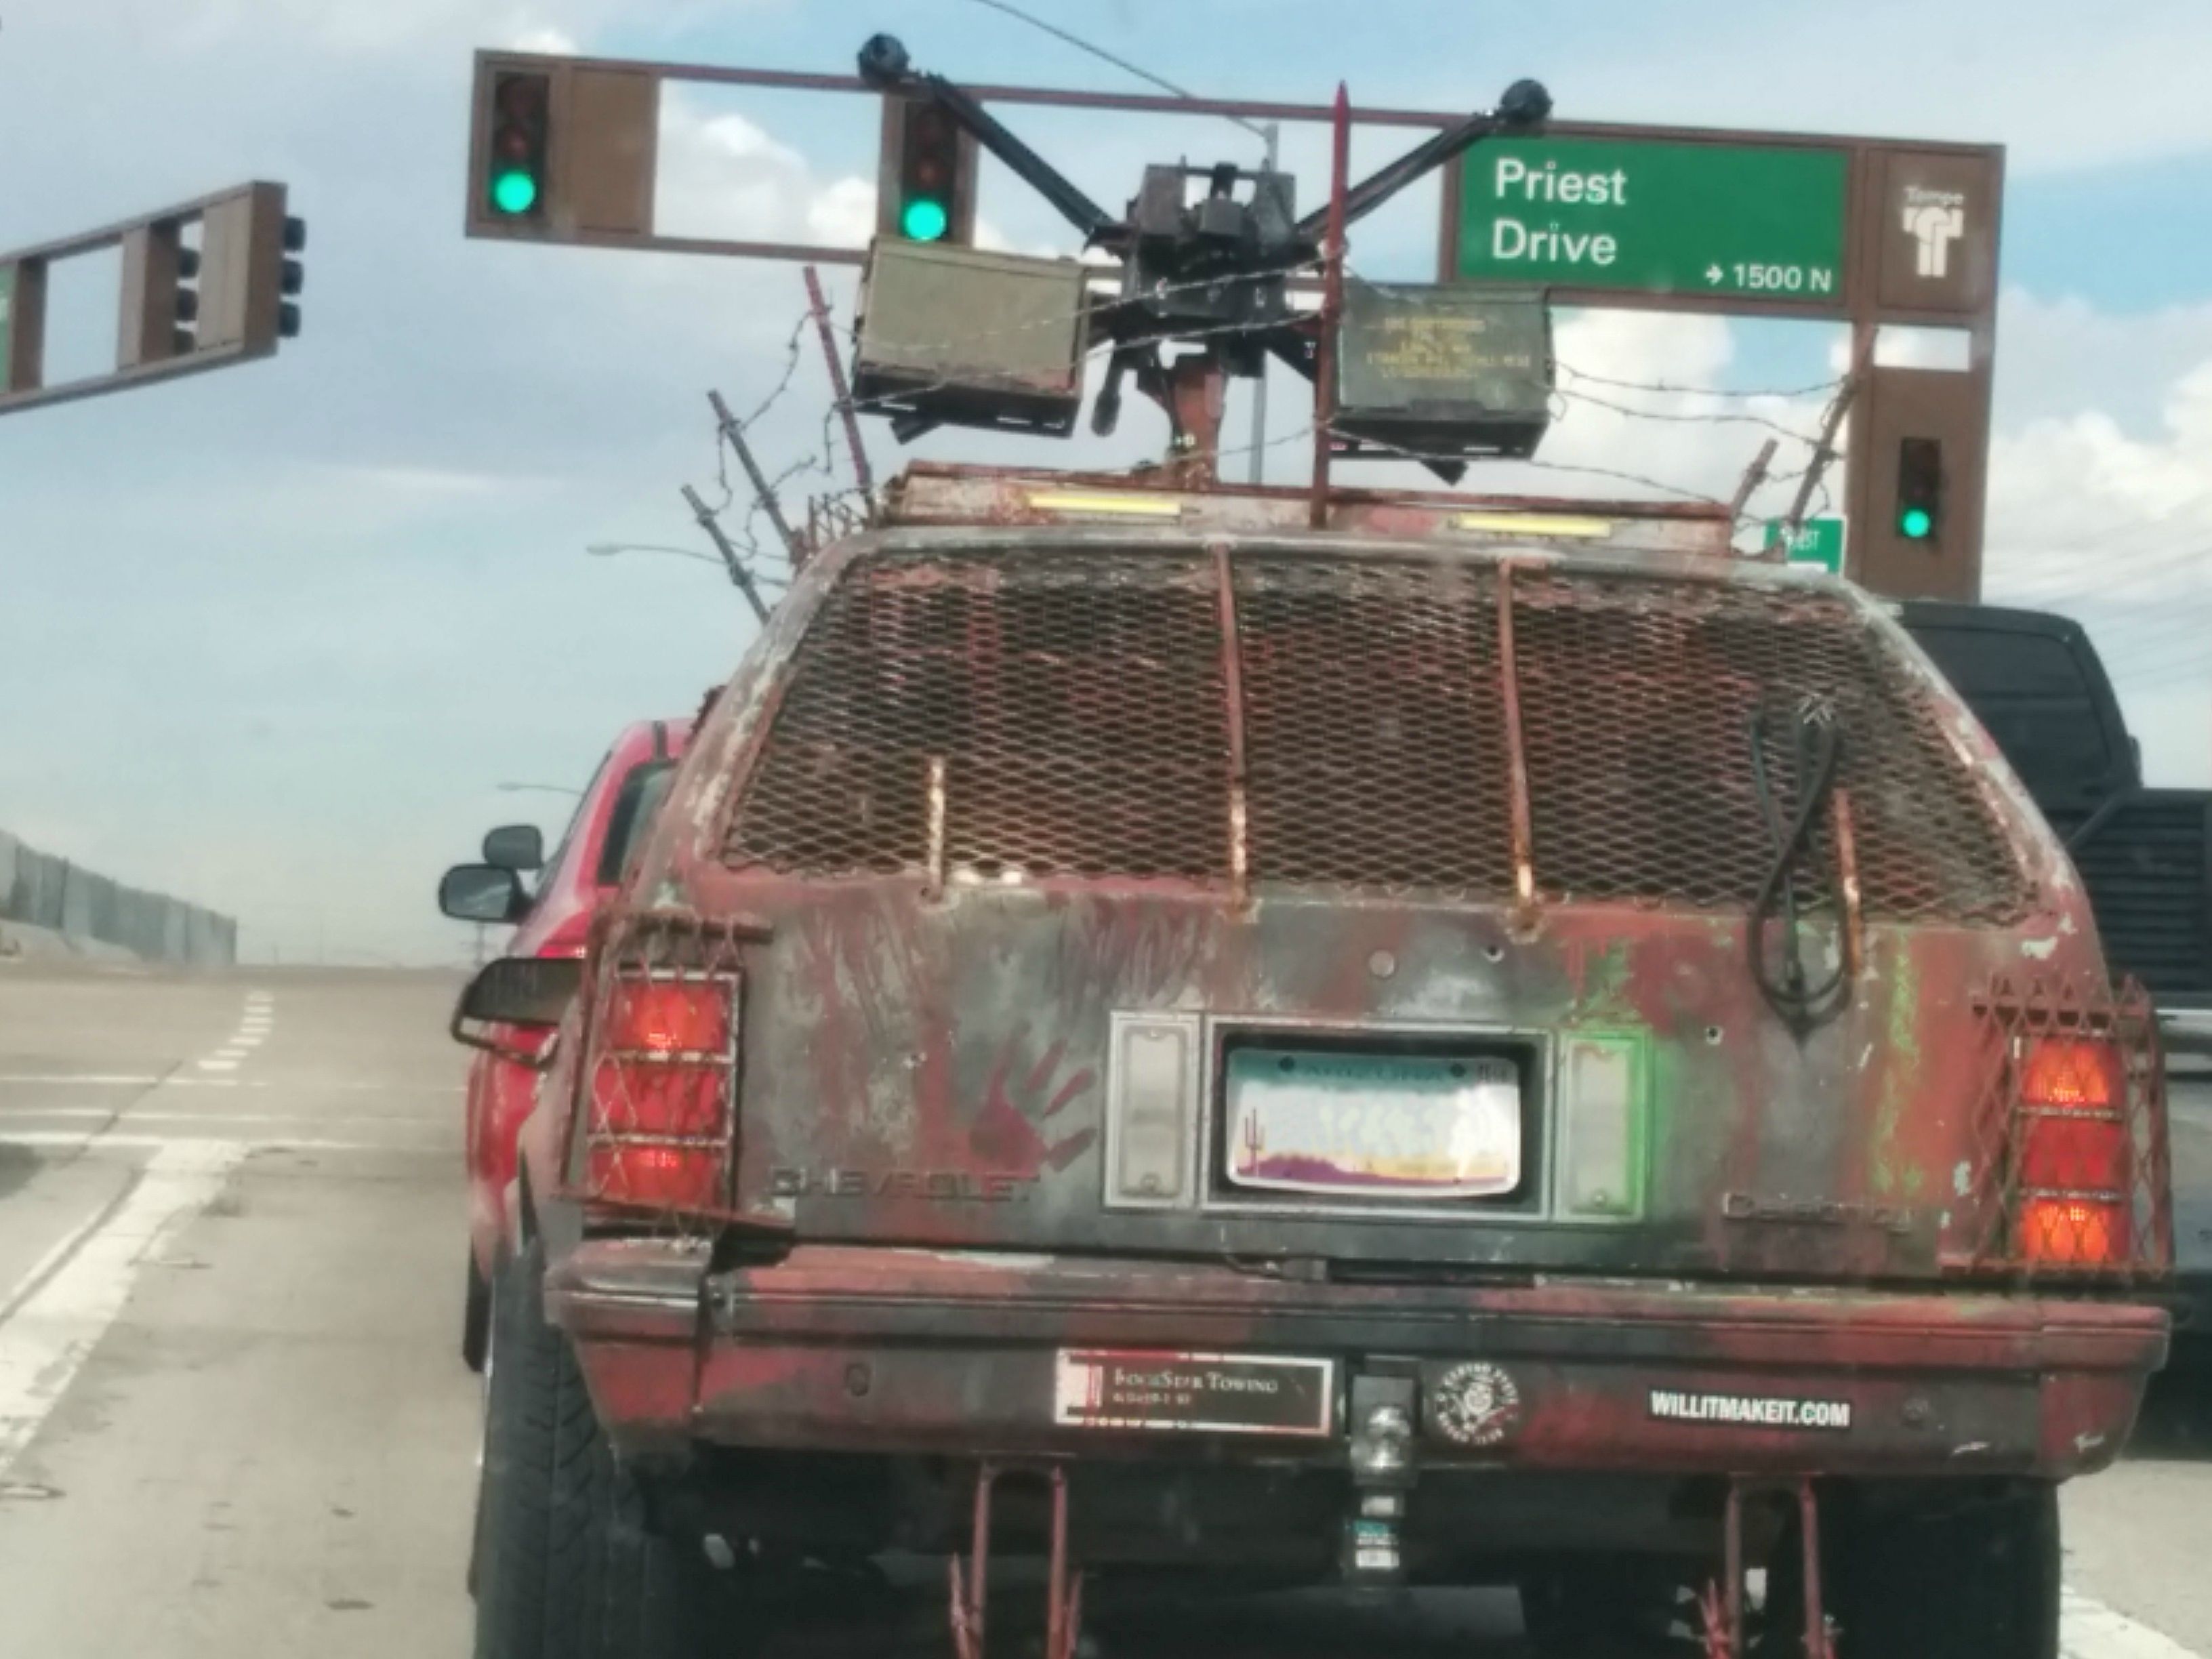 I pull off the freeway and pull up behind this beauty. At first I'm thinking, "what an ugly car". Then I see the hand print and my eyes flash to the turret mounted on top. WTF!